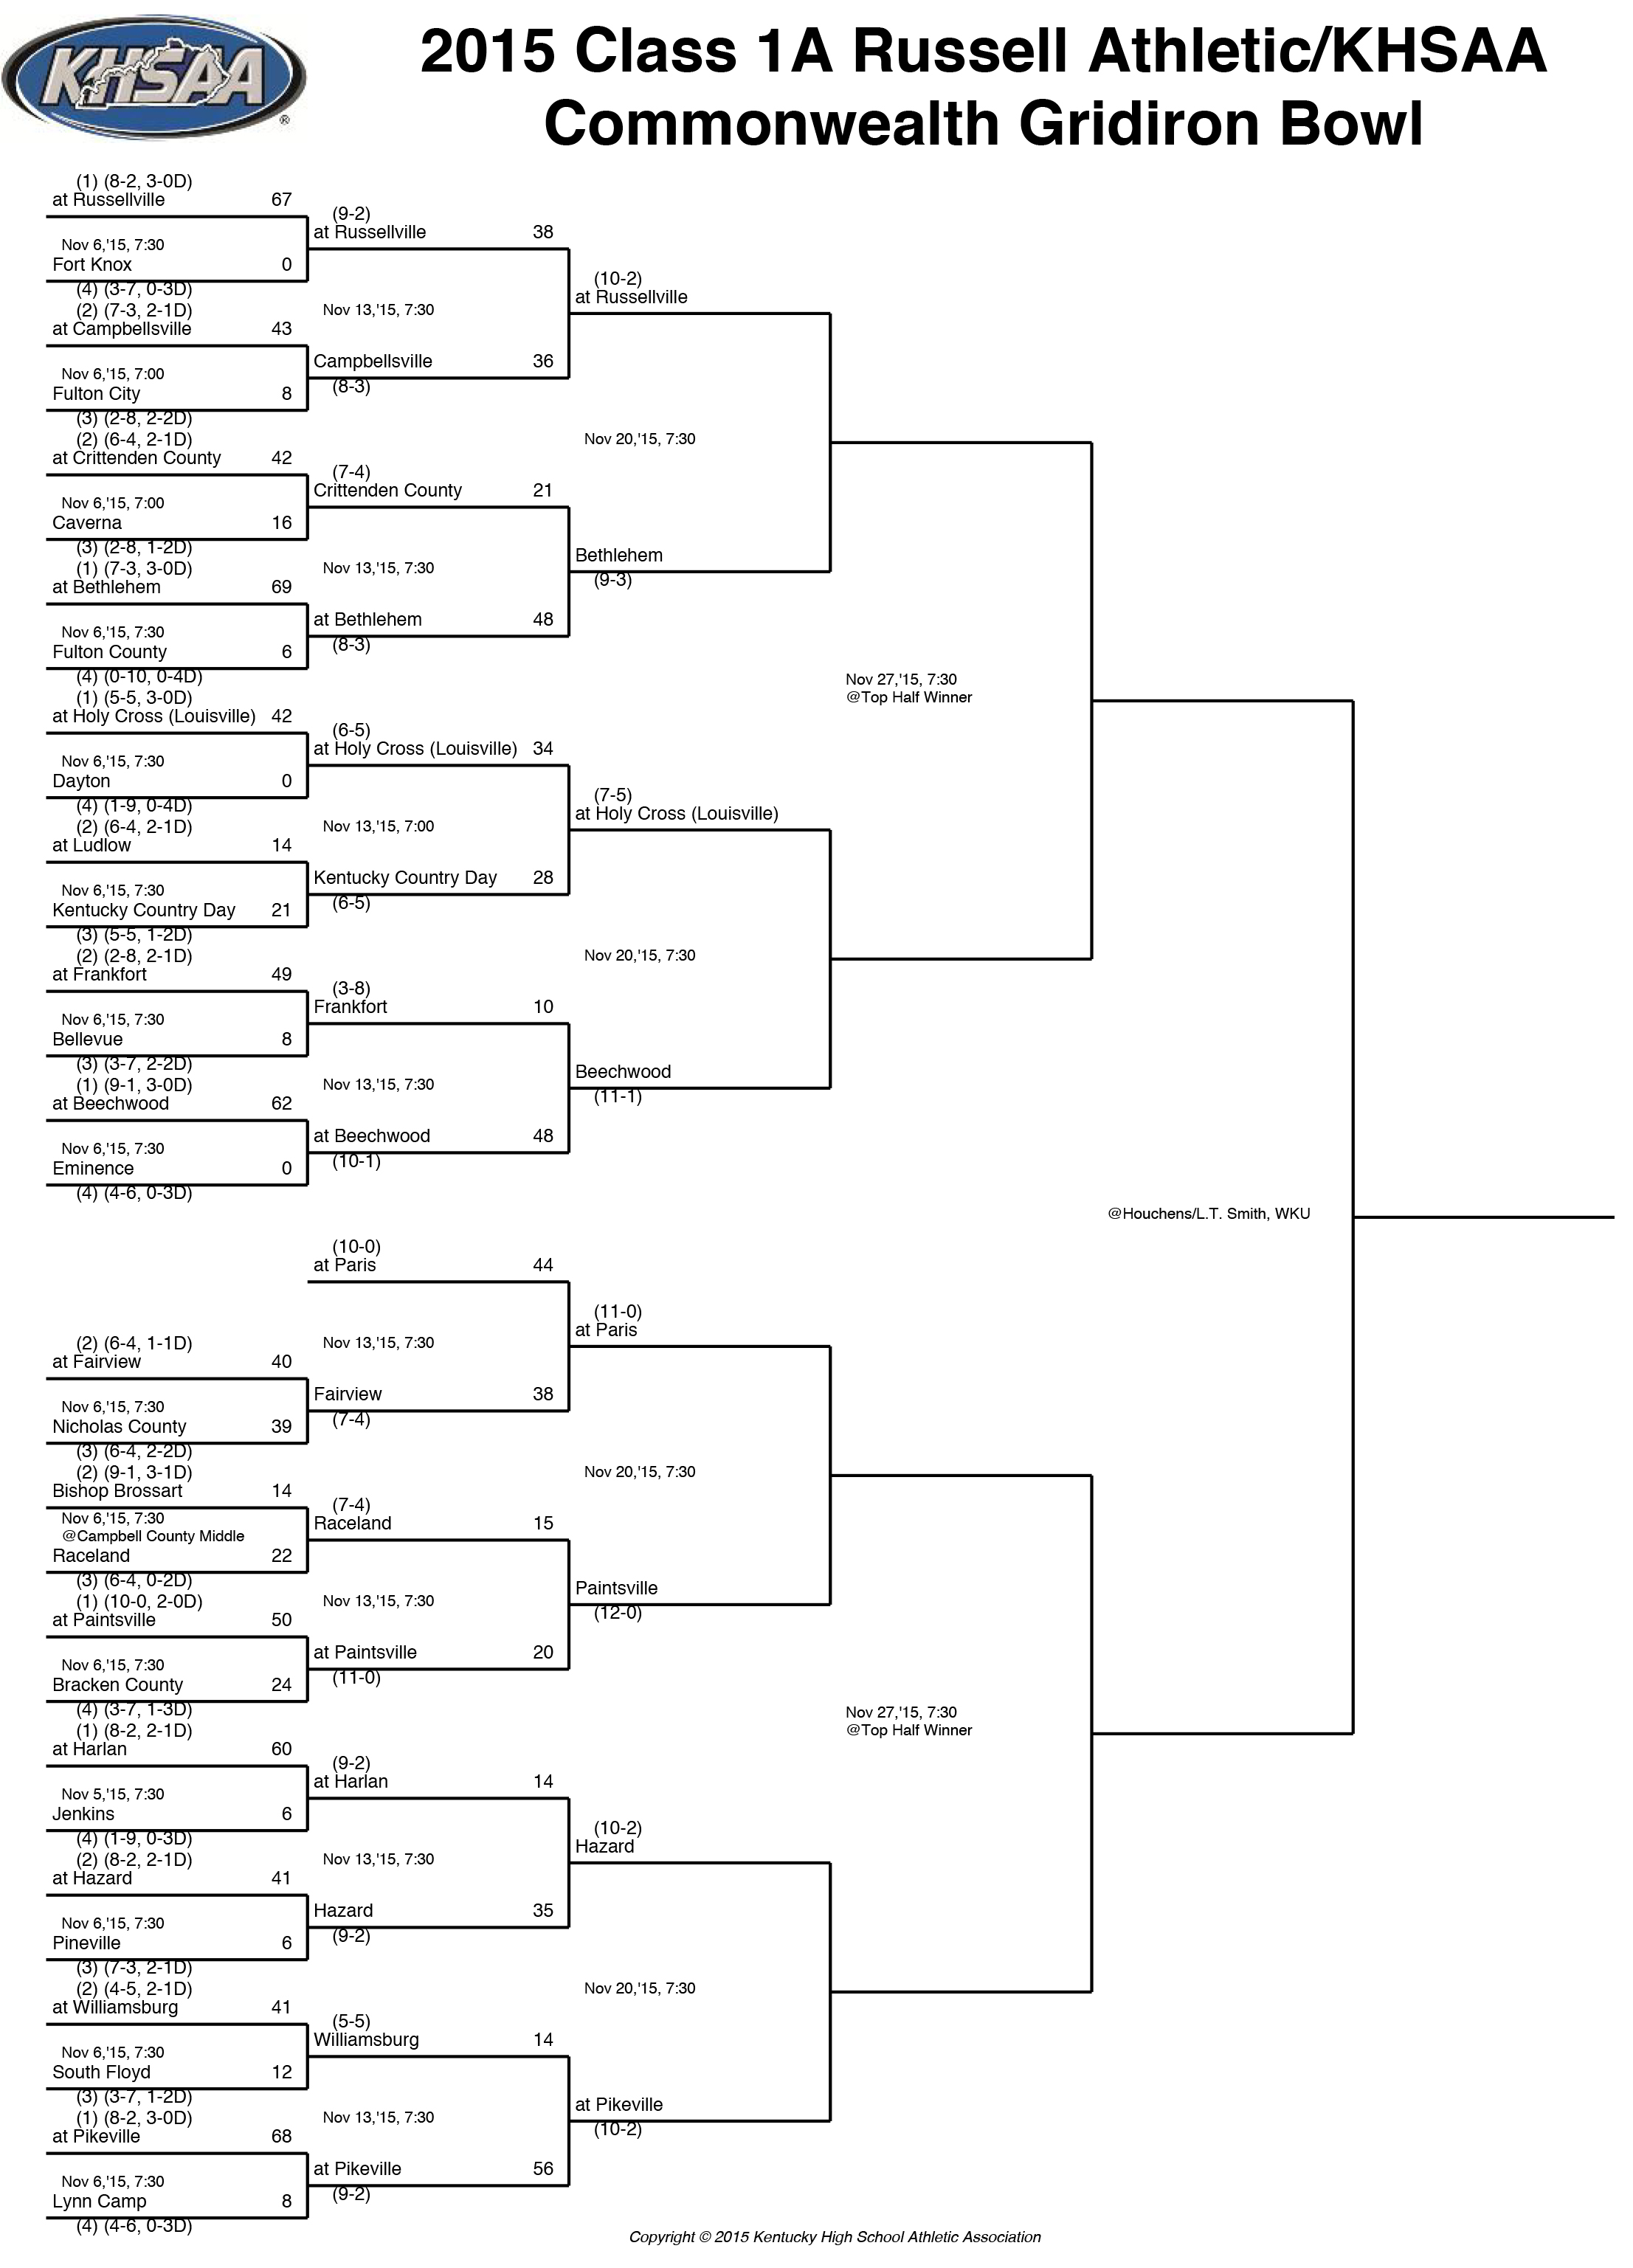 KHSAA Class A Playoff Bracket Holy Cross to face Beechwood in